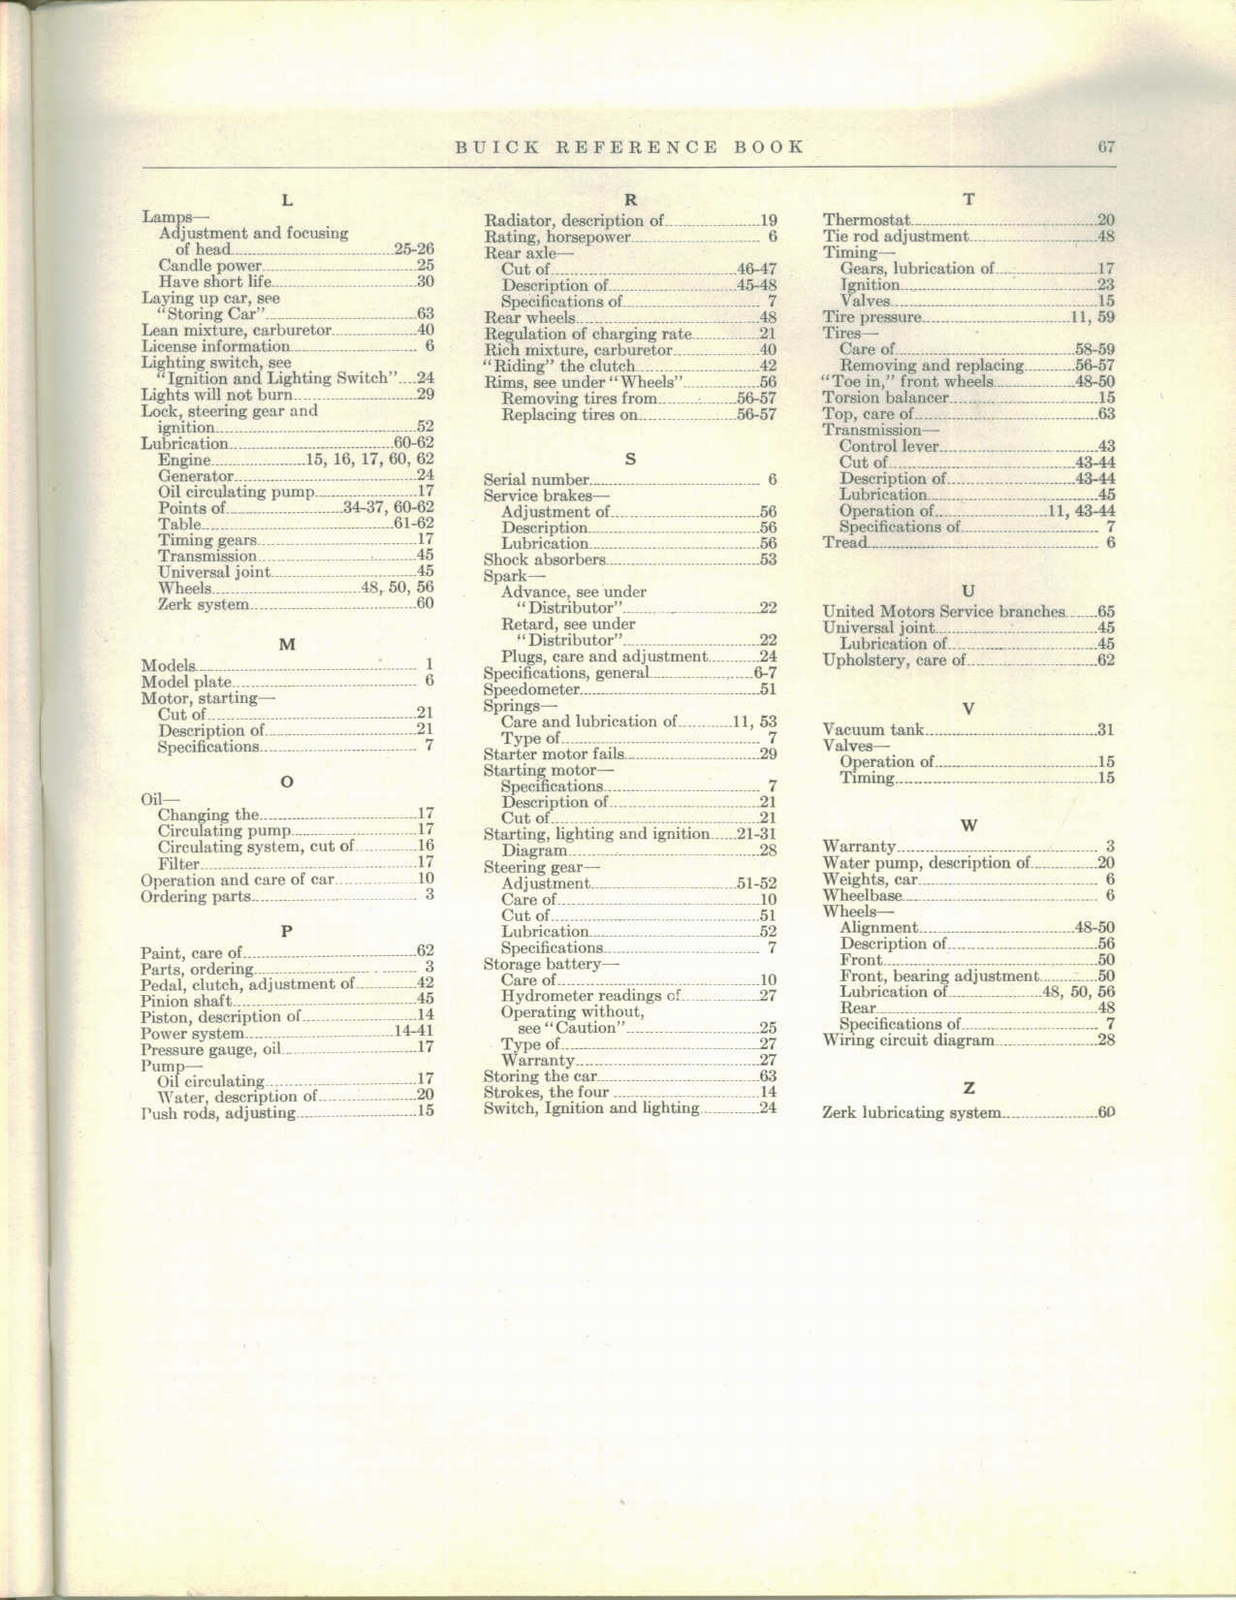 n_1928 Buick Reference Book-67.jpg